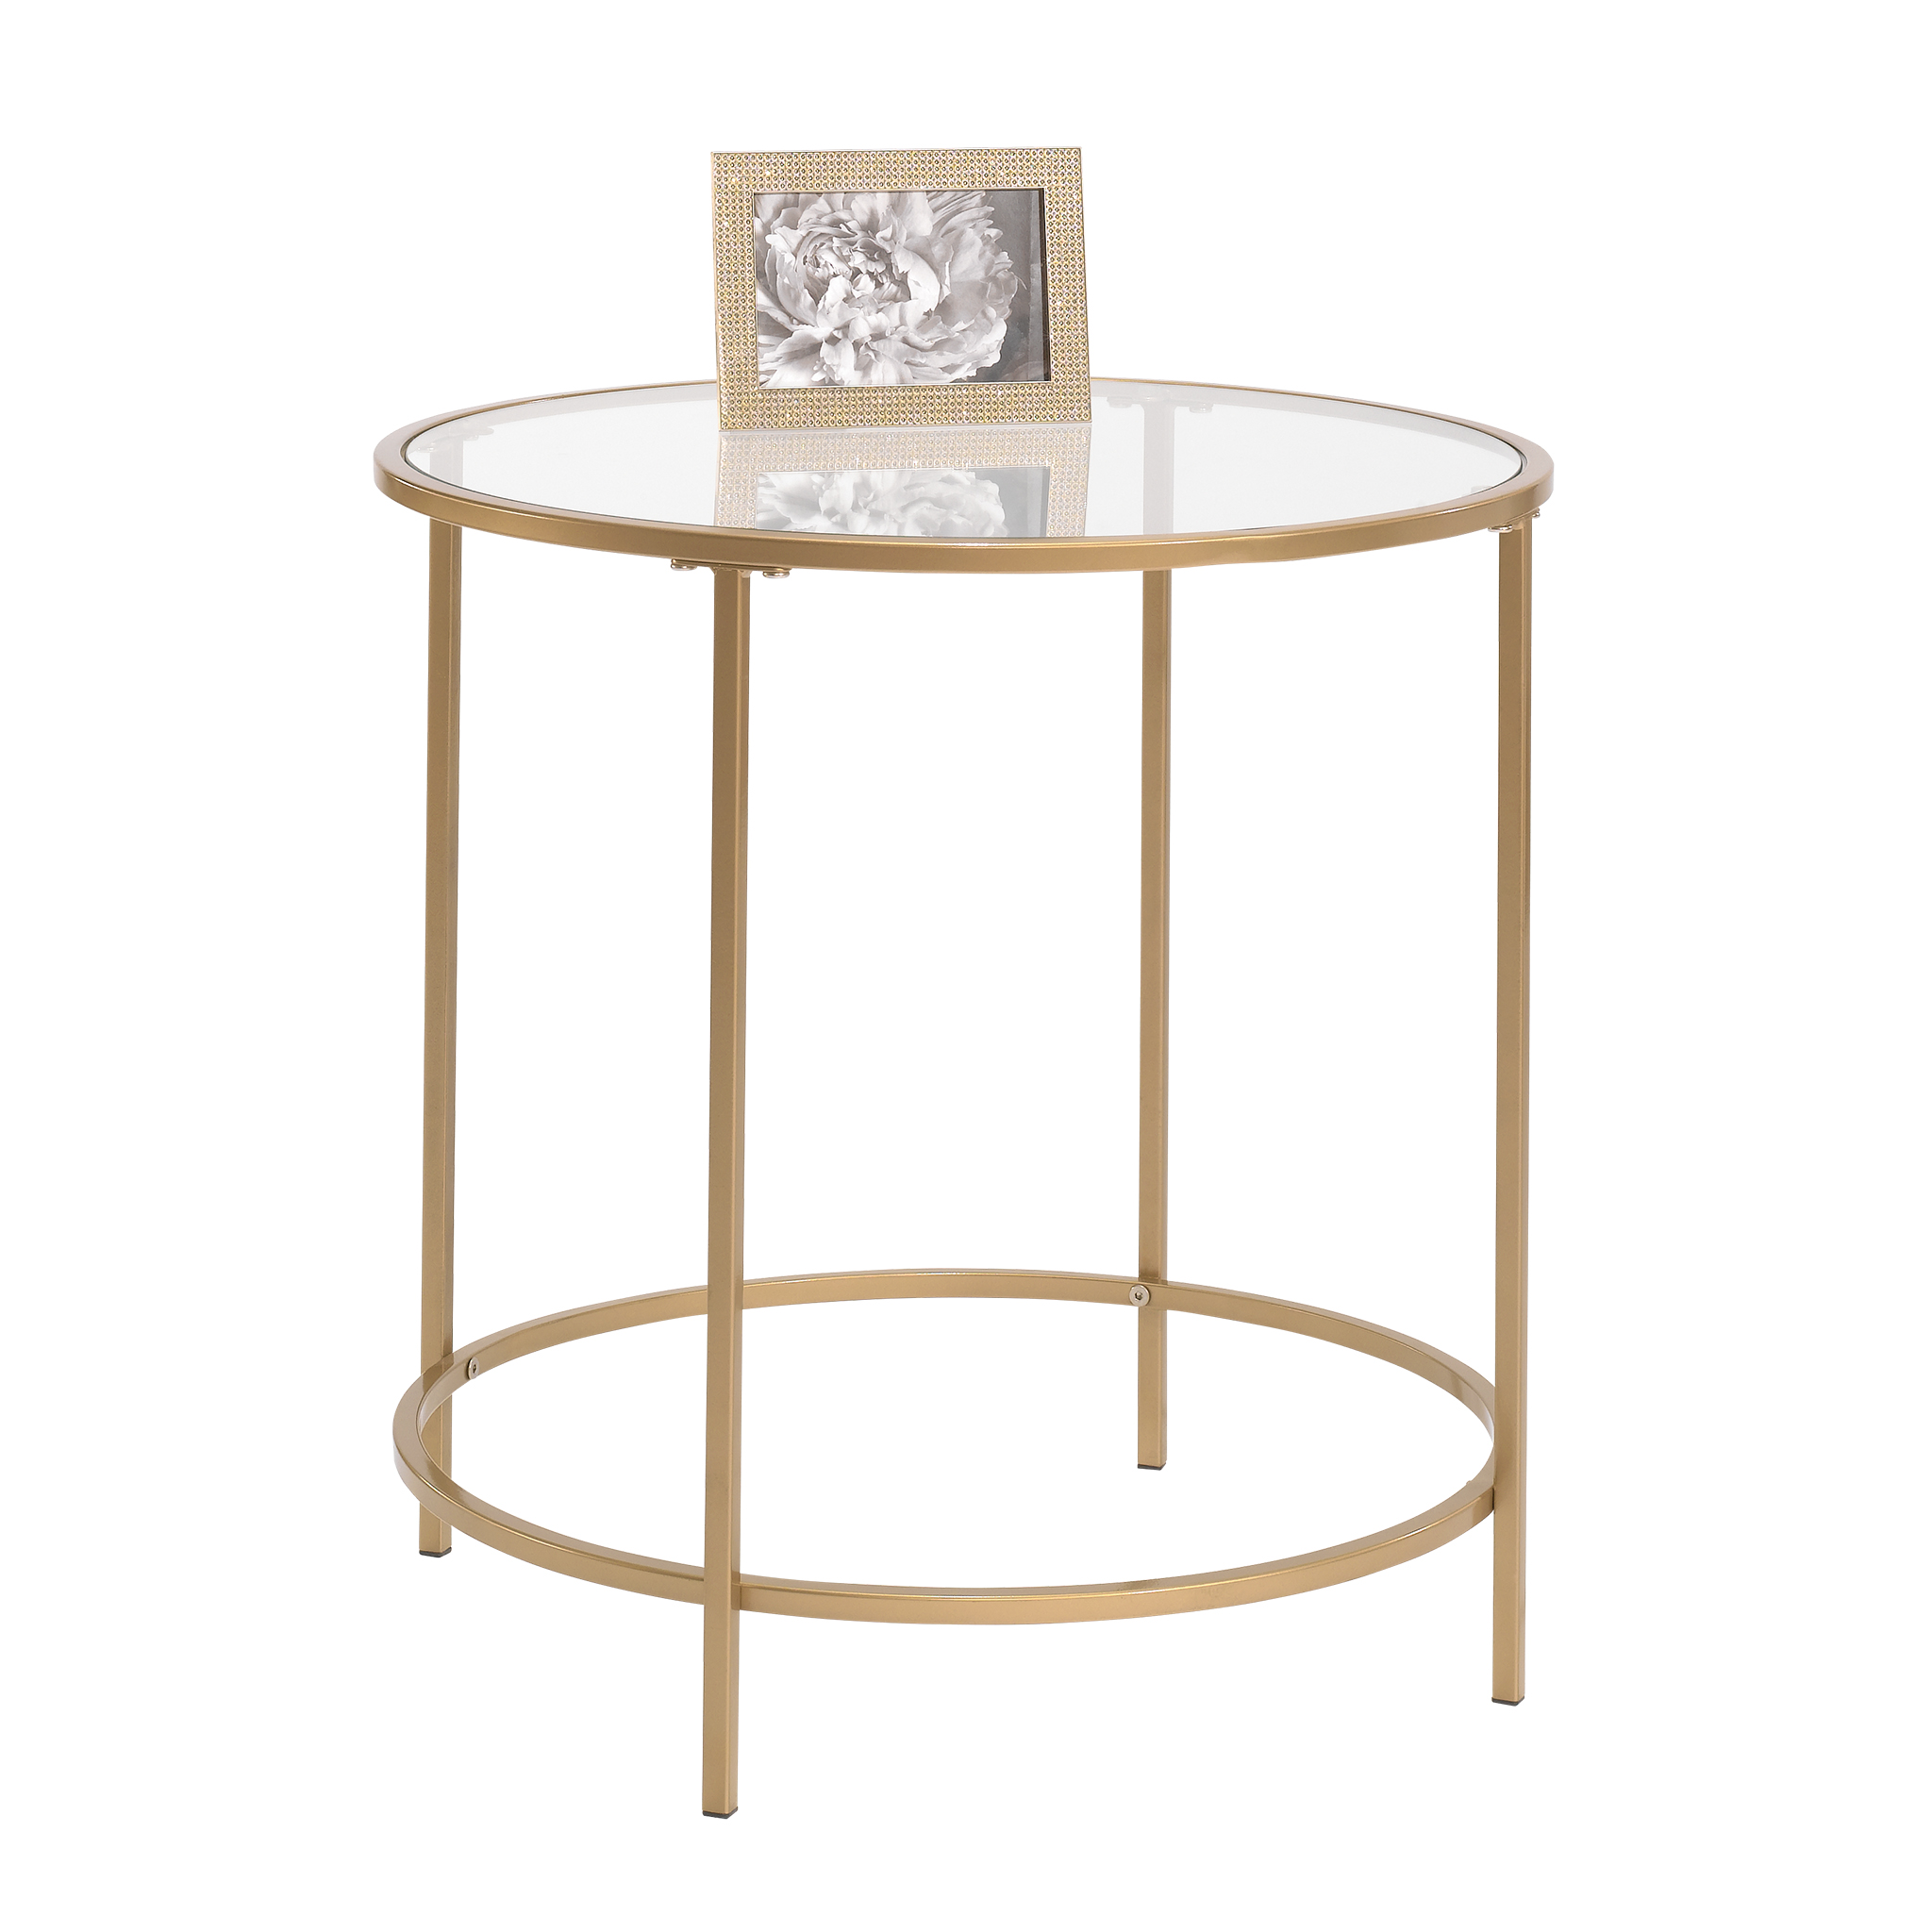 Better Homes & Gardens Nola Side Table, Gold Finish - image 3 of 6